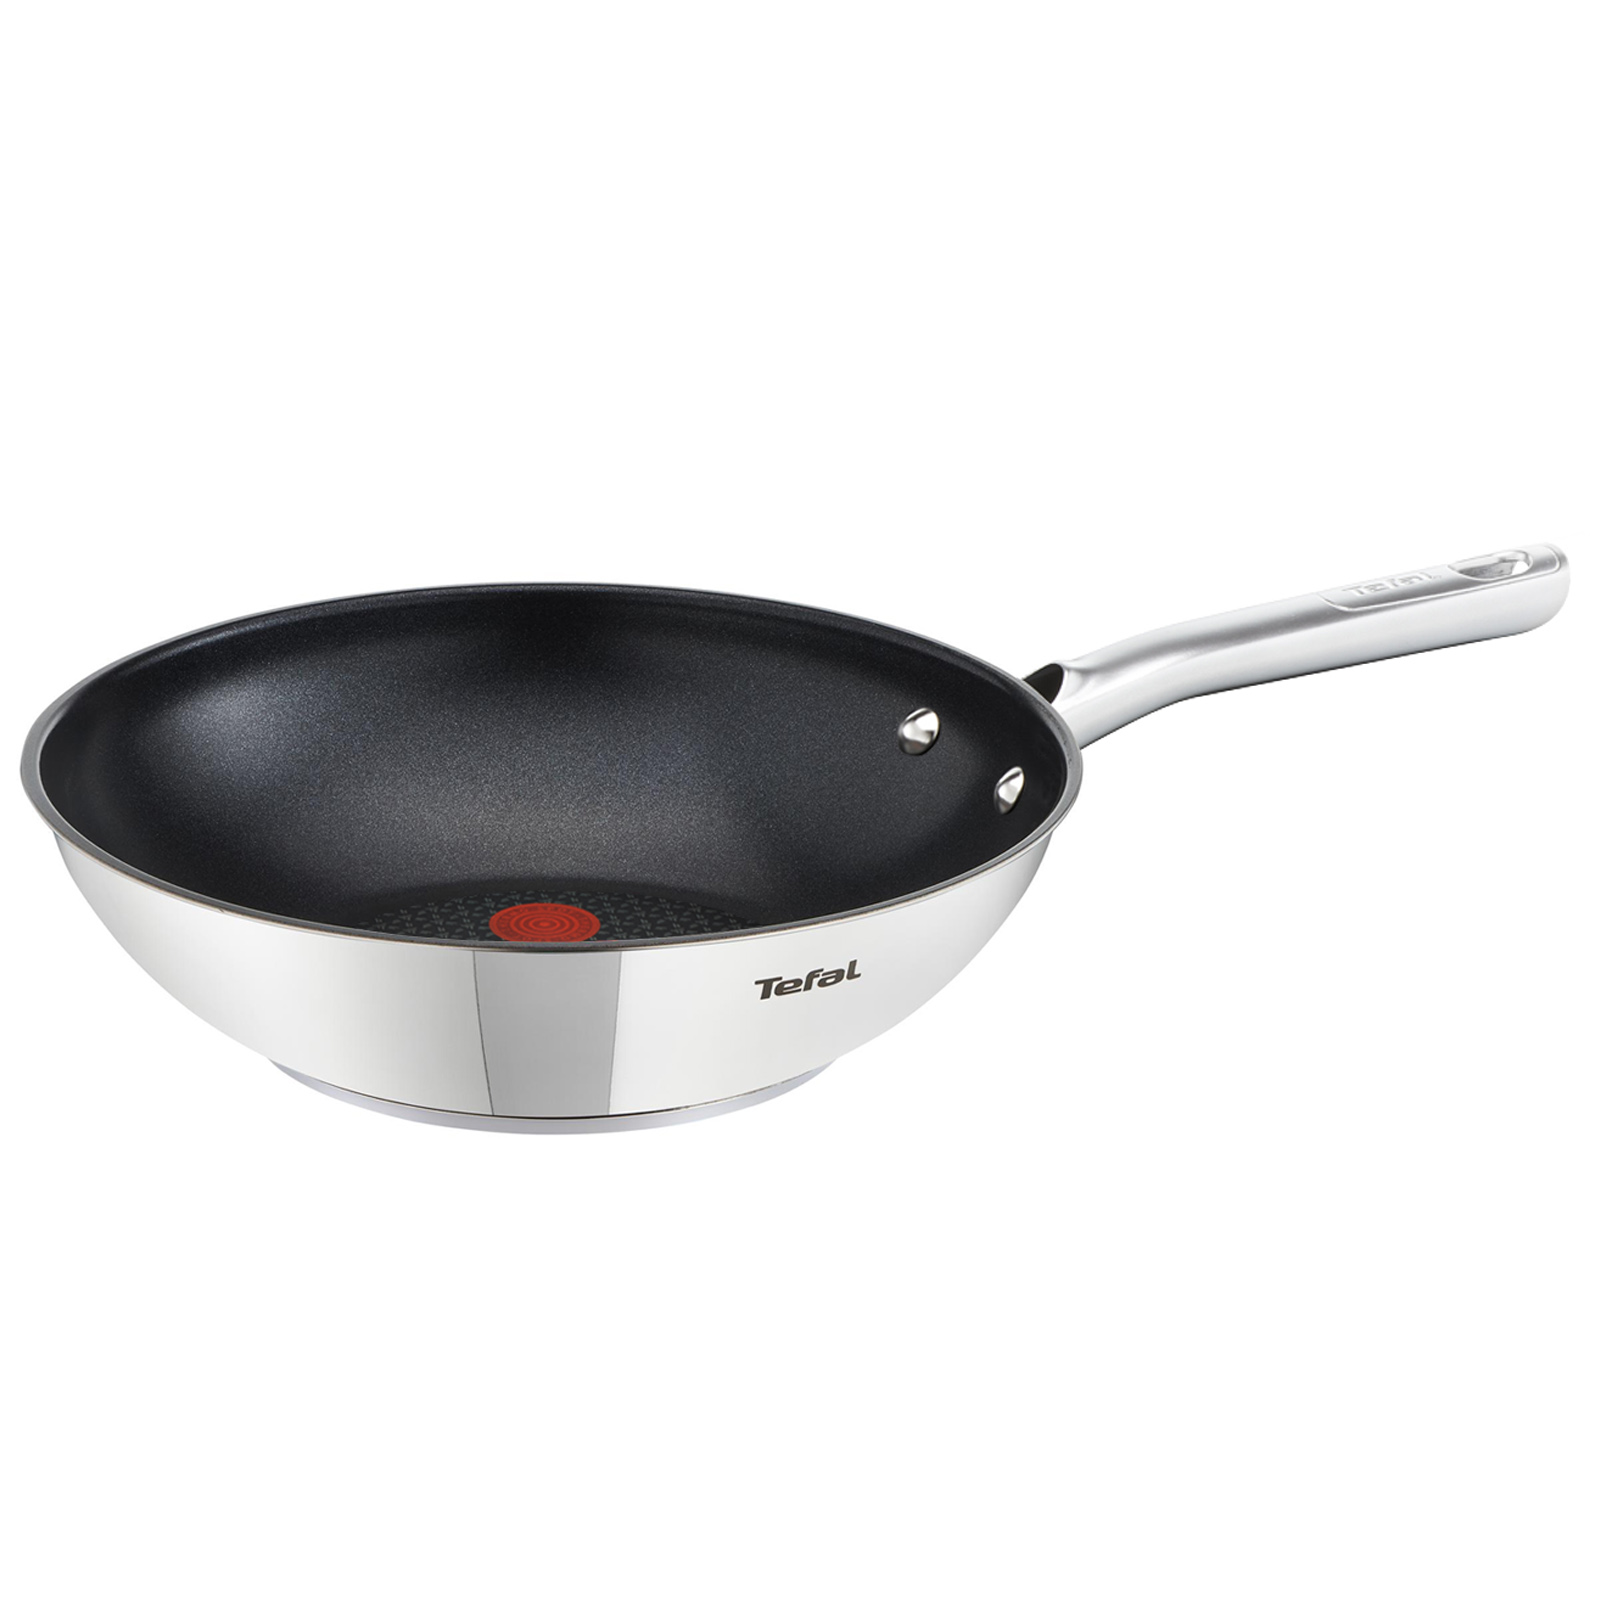 Tefal Duetto Stainless Steel Induction Nonstick Frying Pan 11.0" Dishwasher Safe 